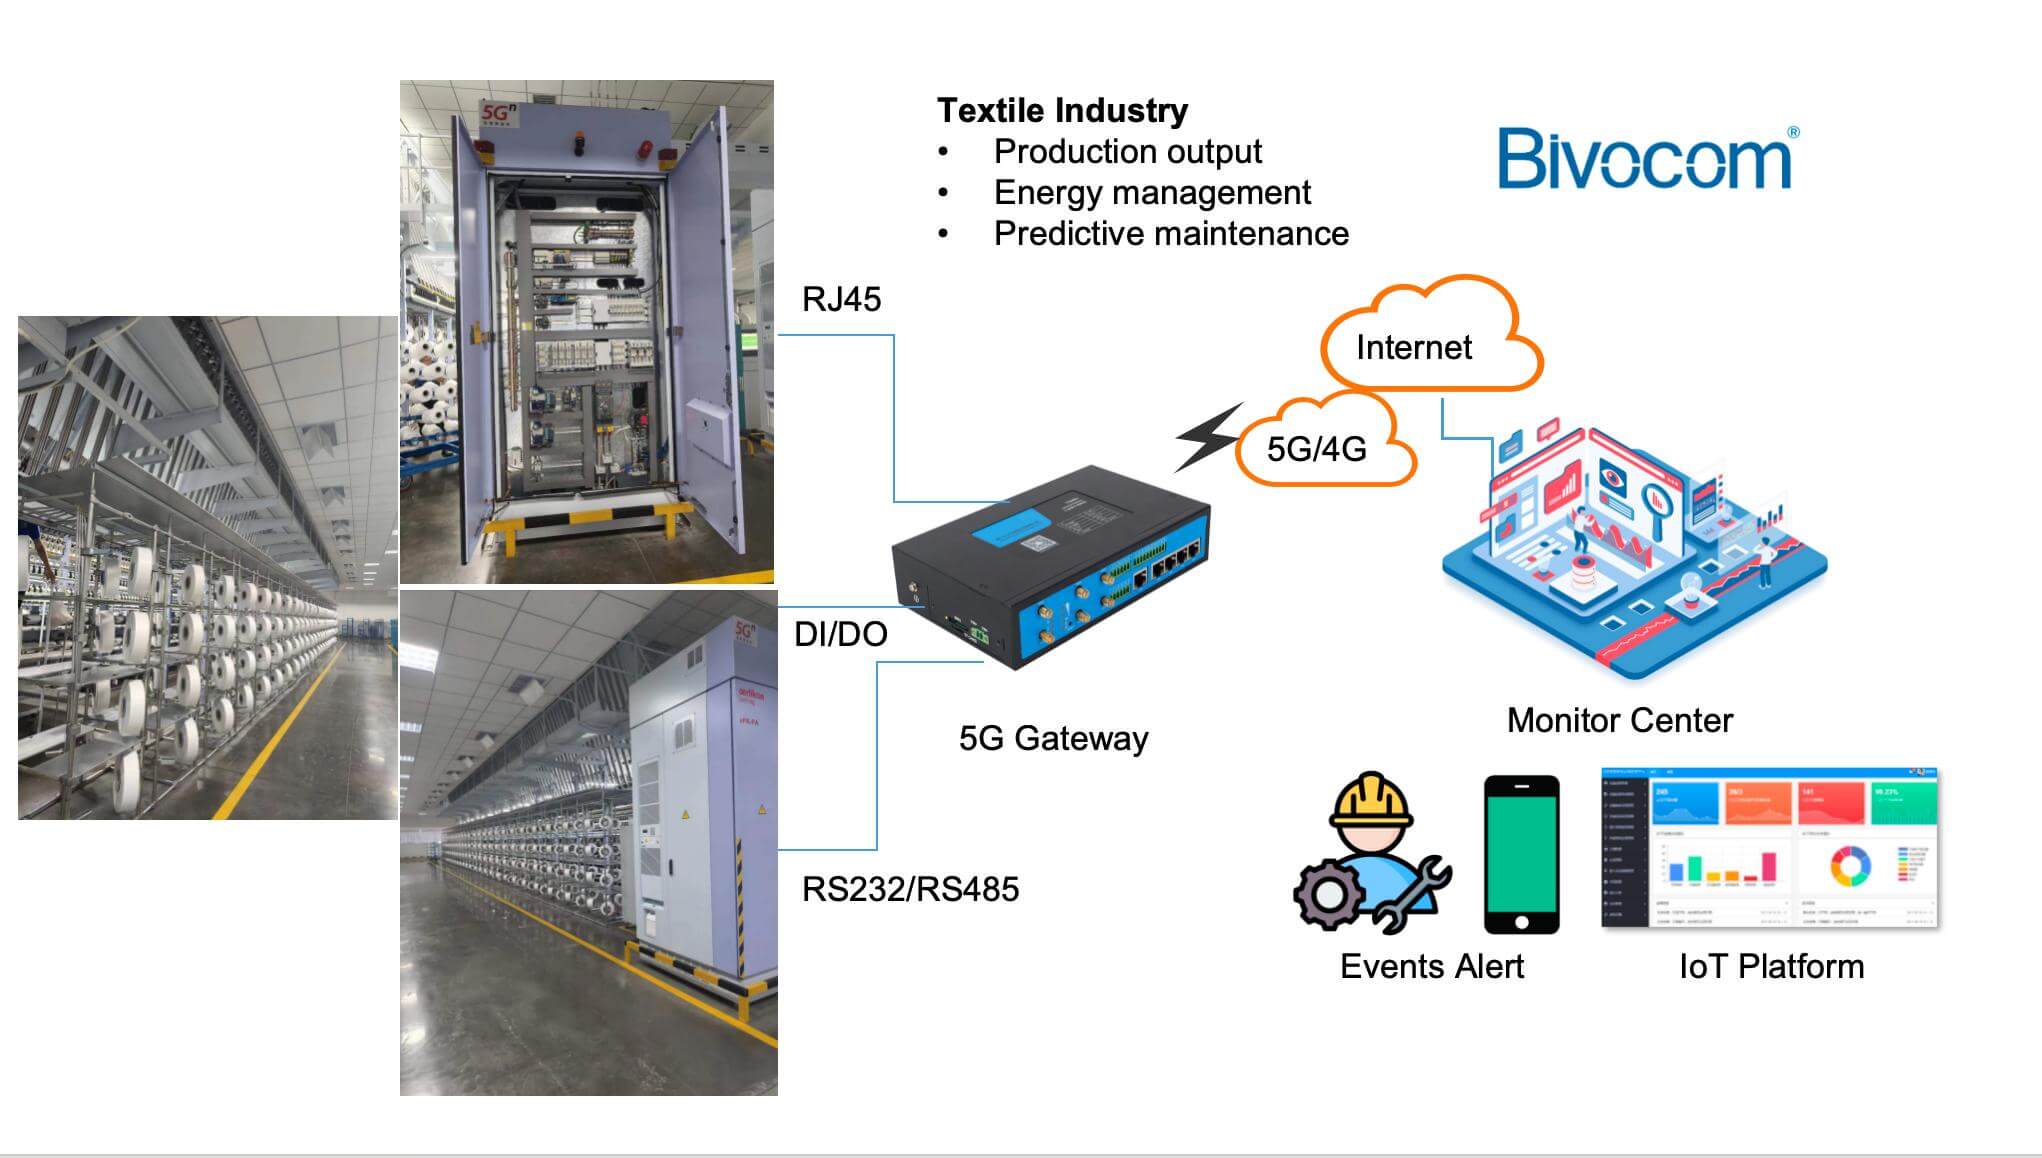 5g gateway for textile industry